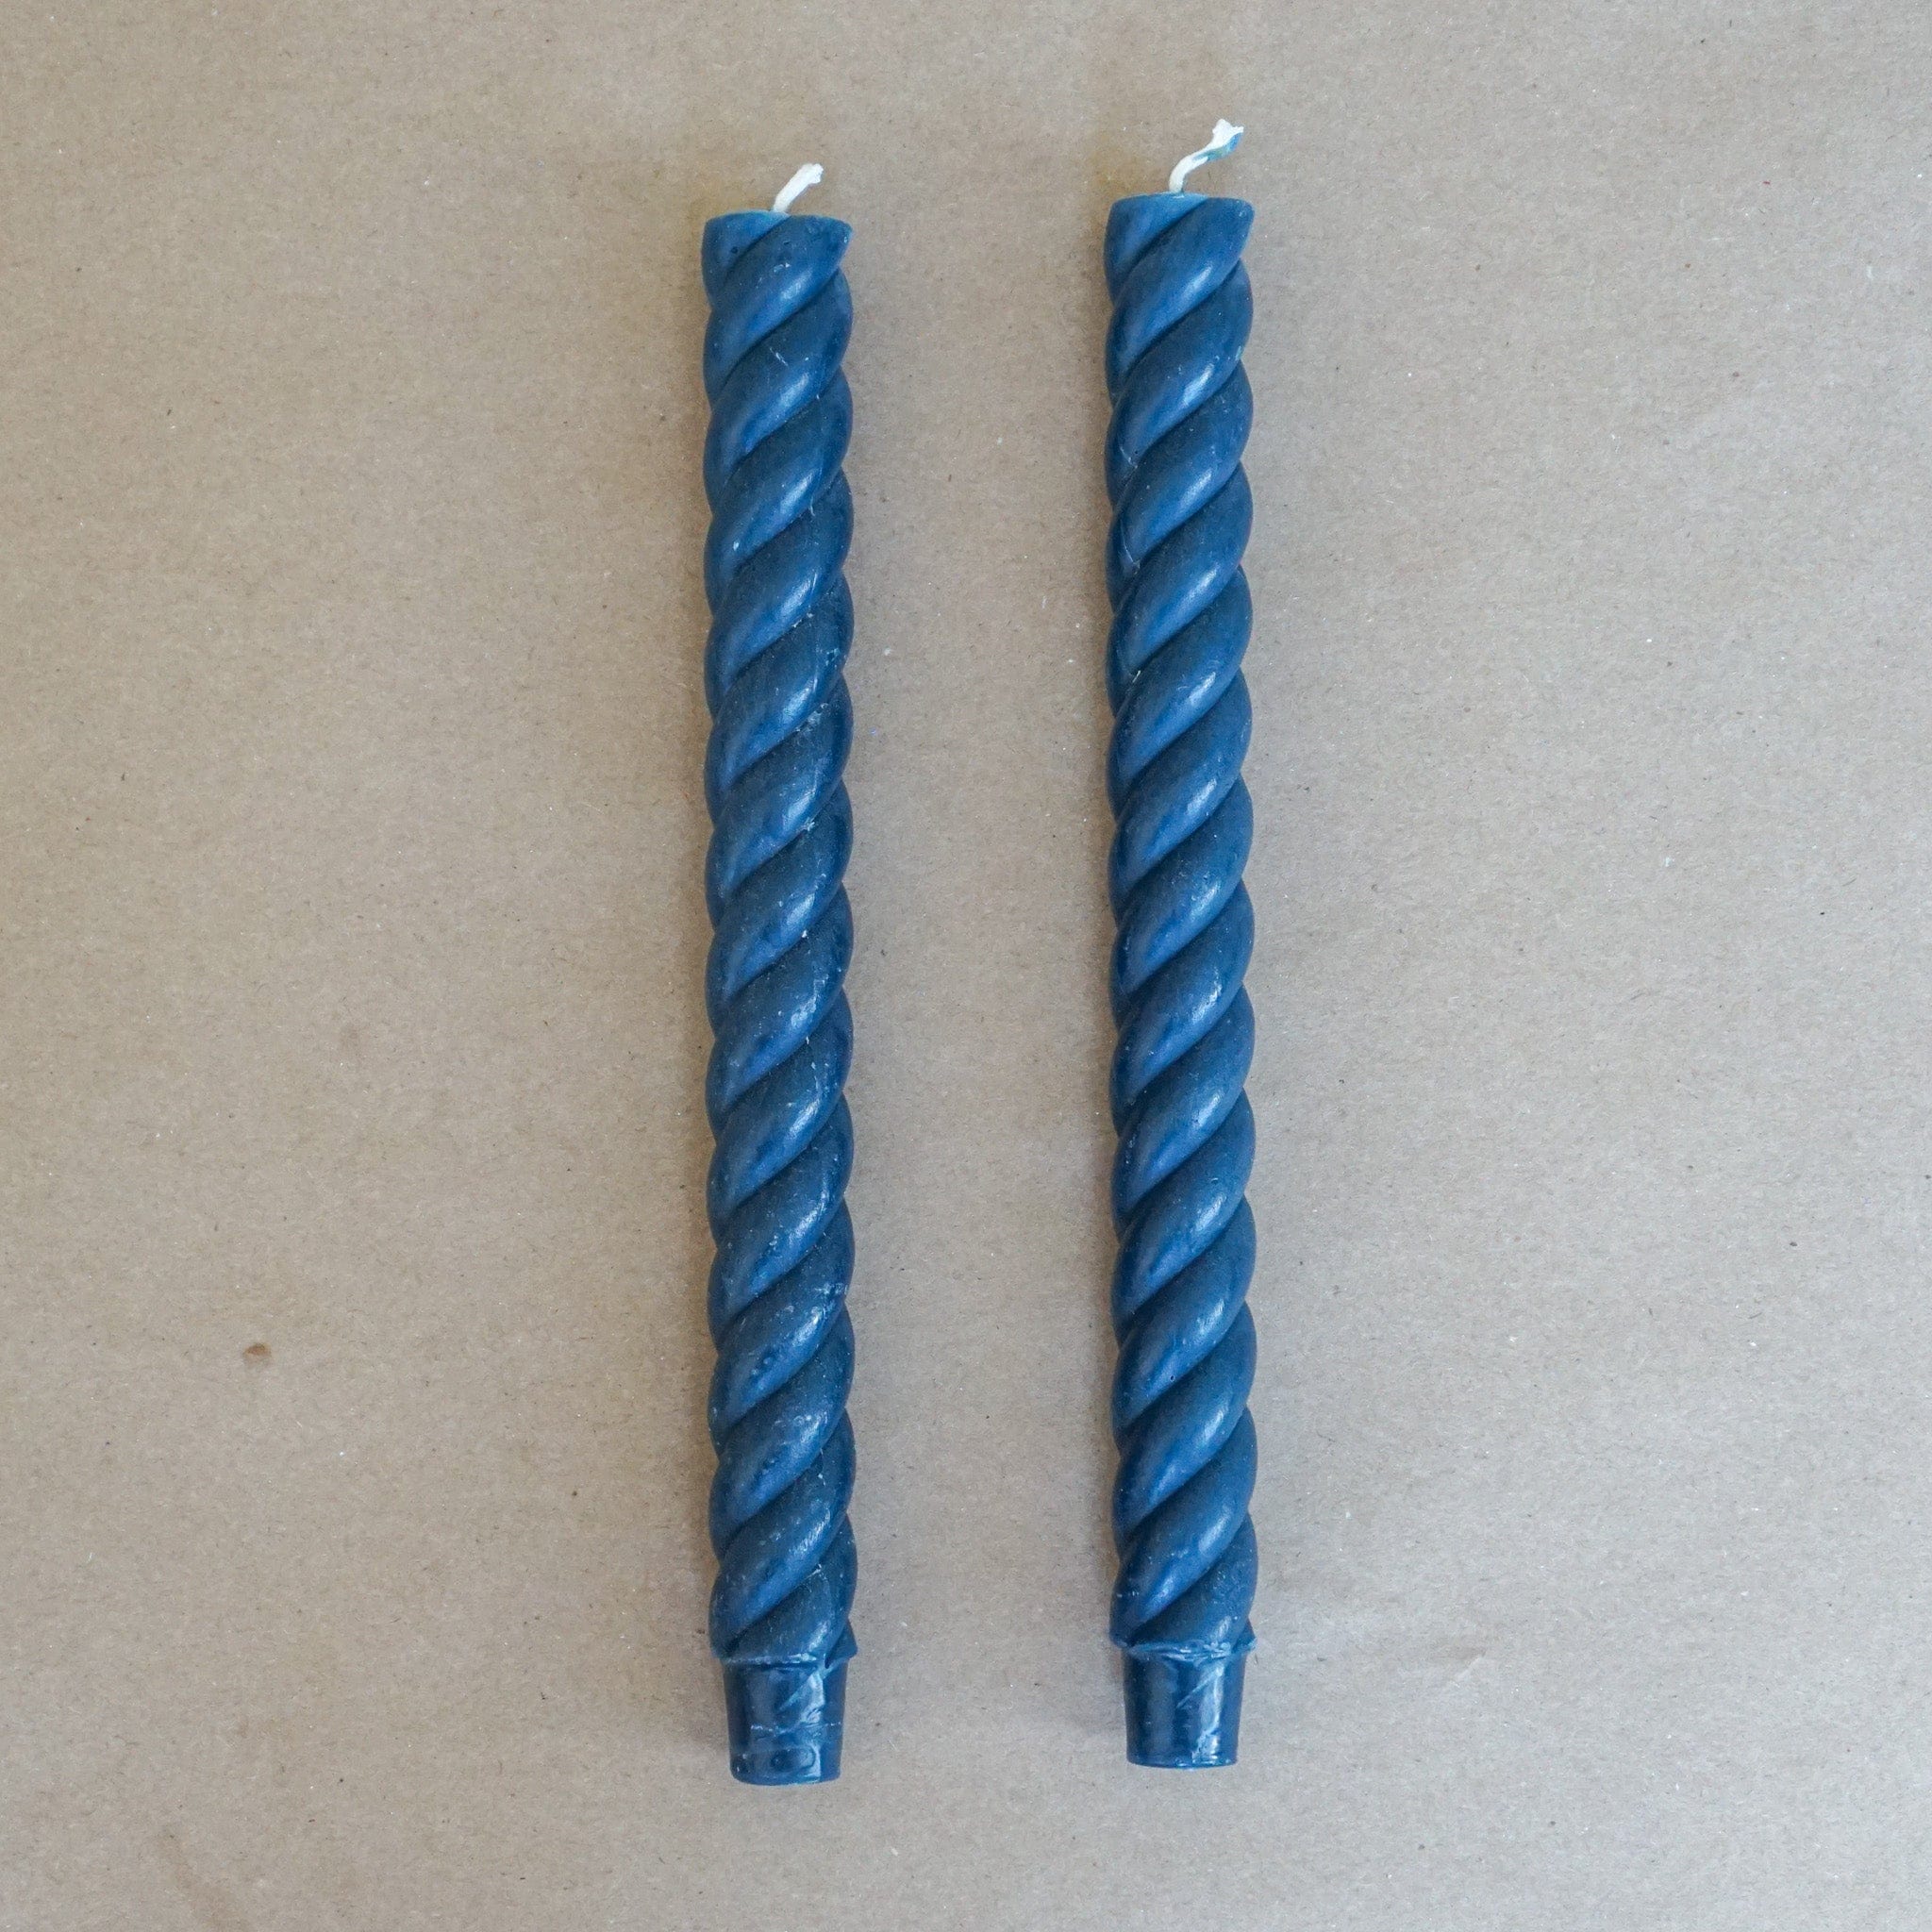 GREENTREE CANDLES Decor Rope Taper Greentree Candles - Blue Slate